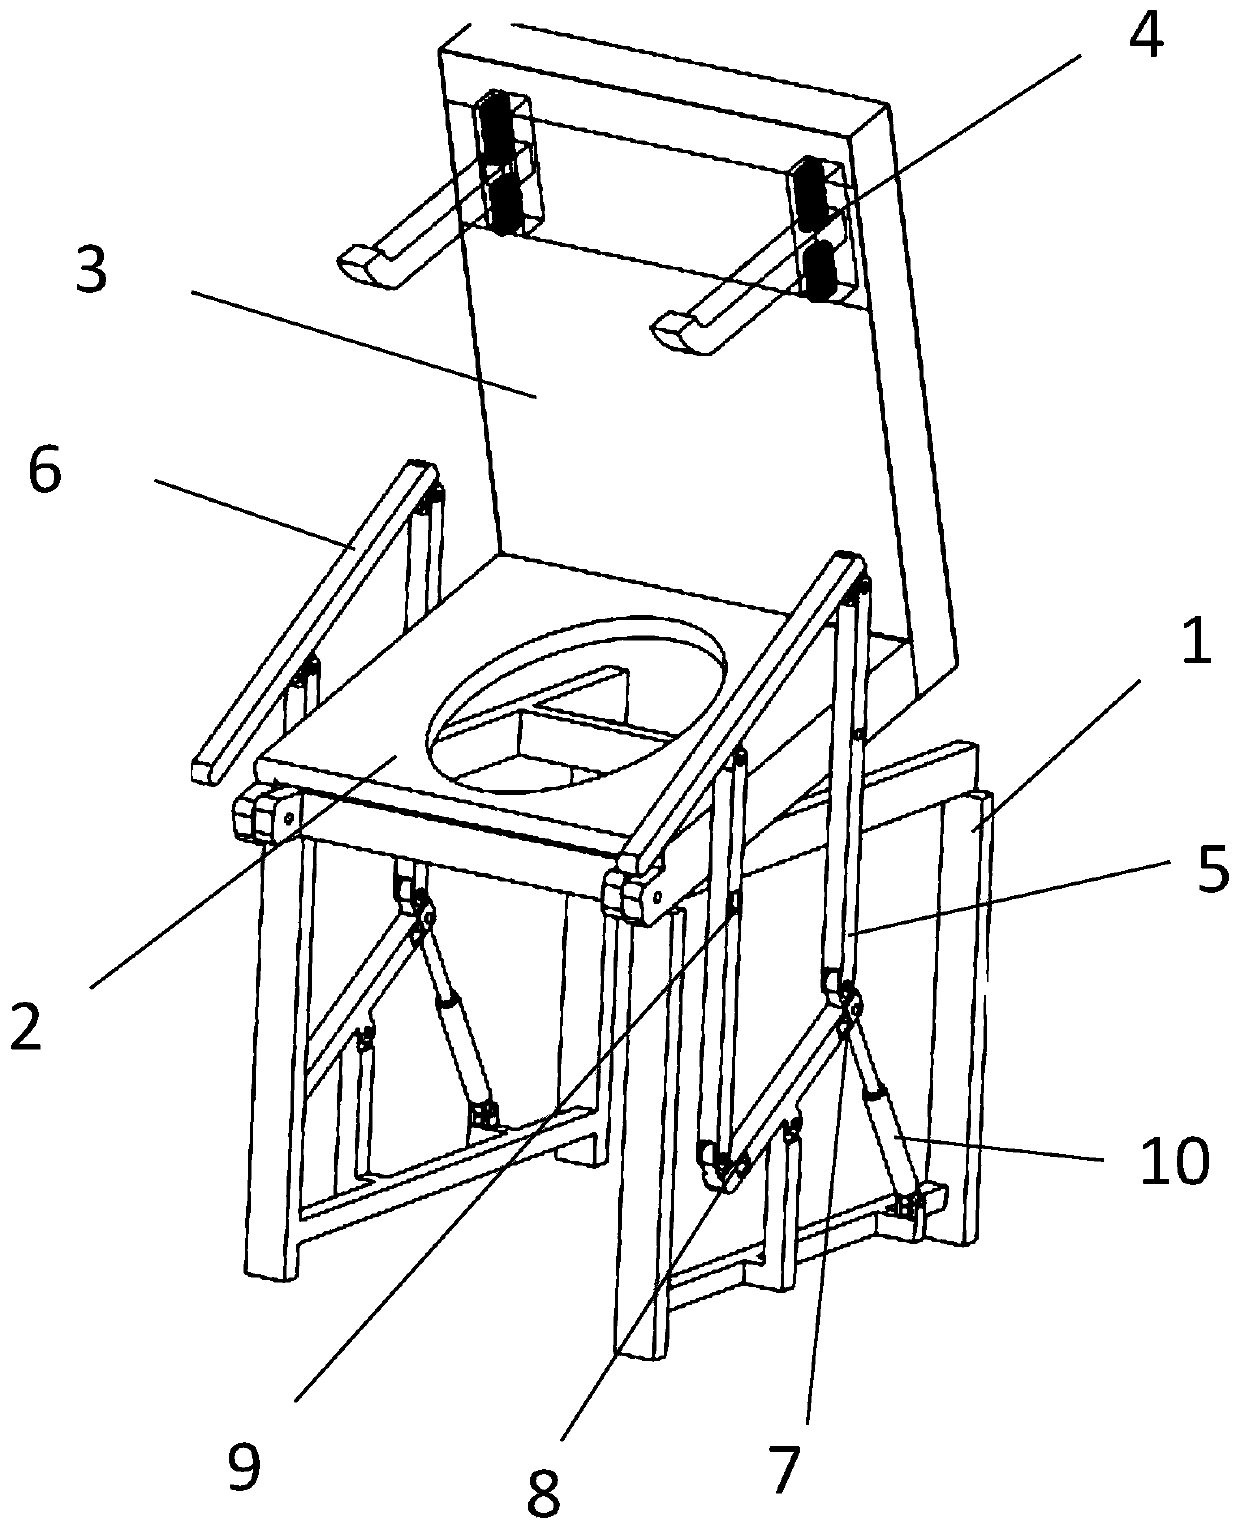 Auxiliary support chair device